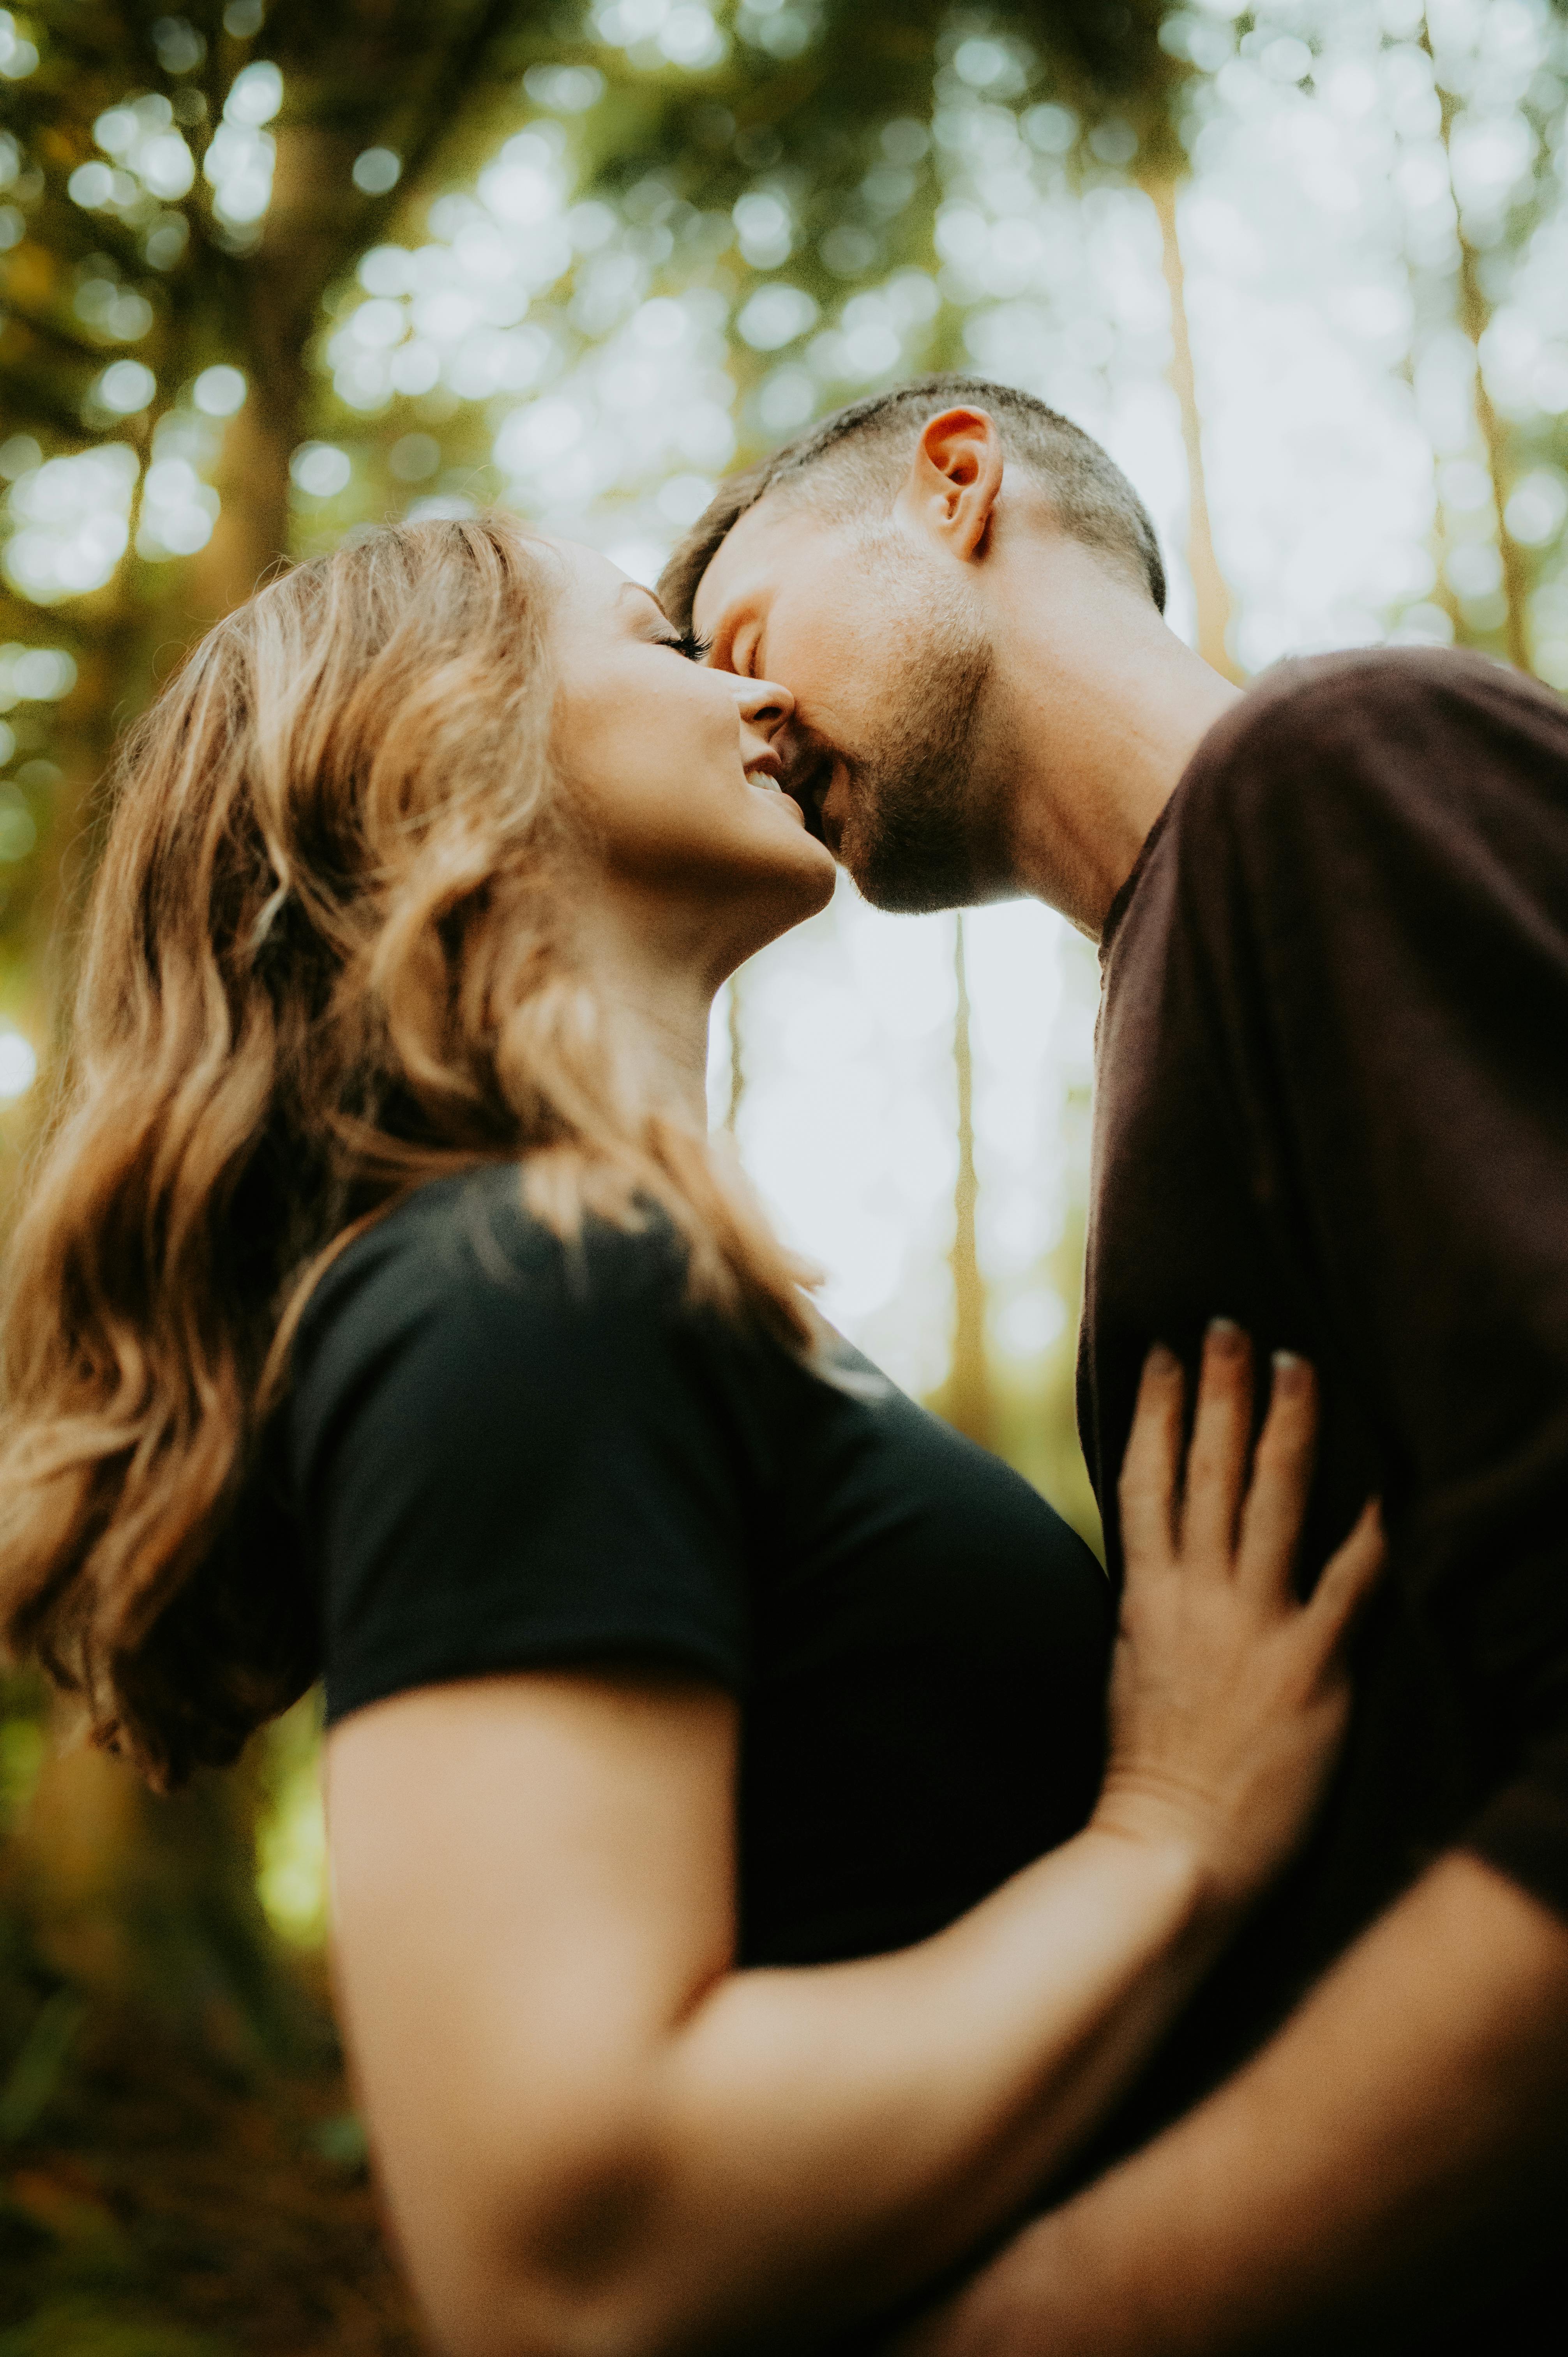 A man kissing a woman in the woods | Source: Pexels